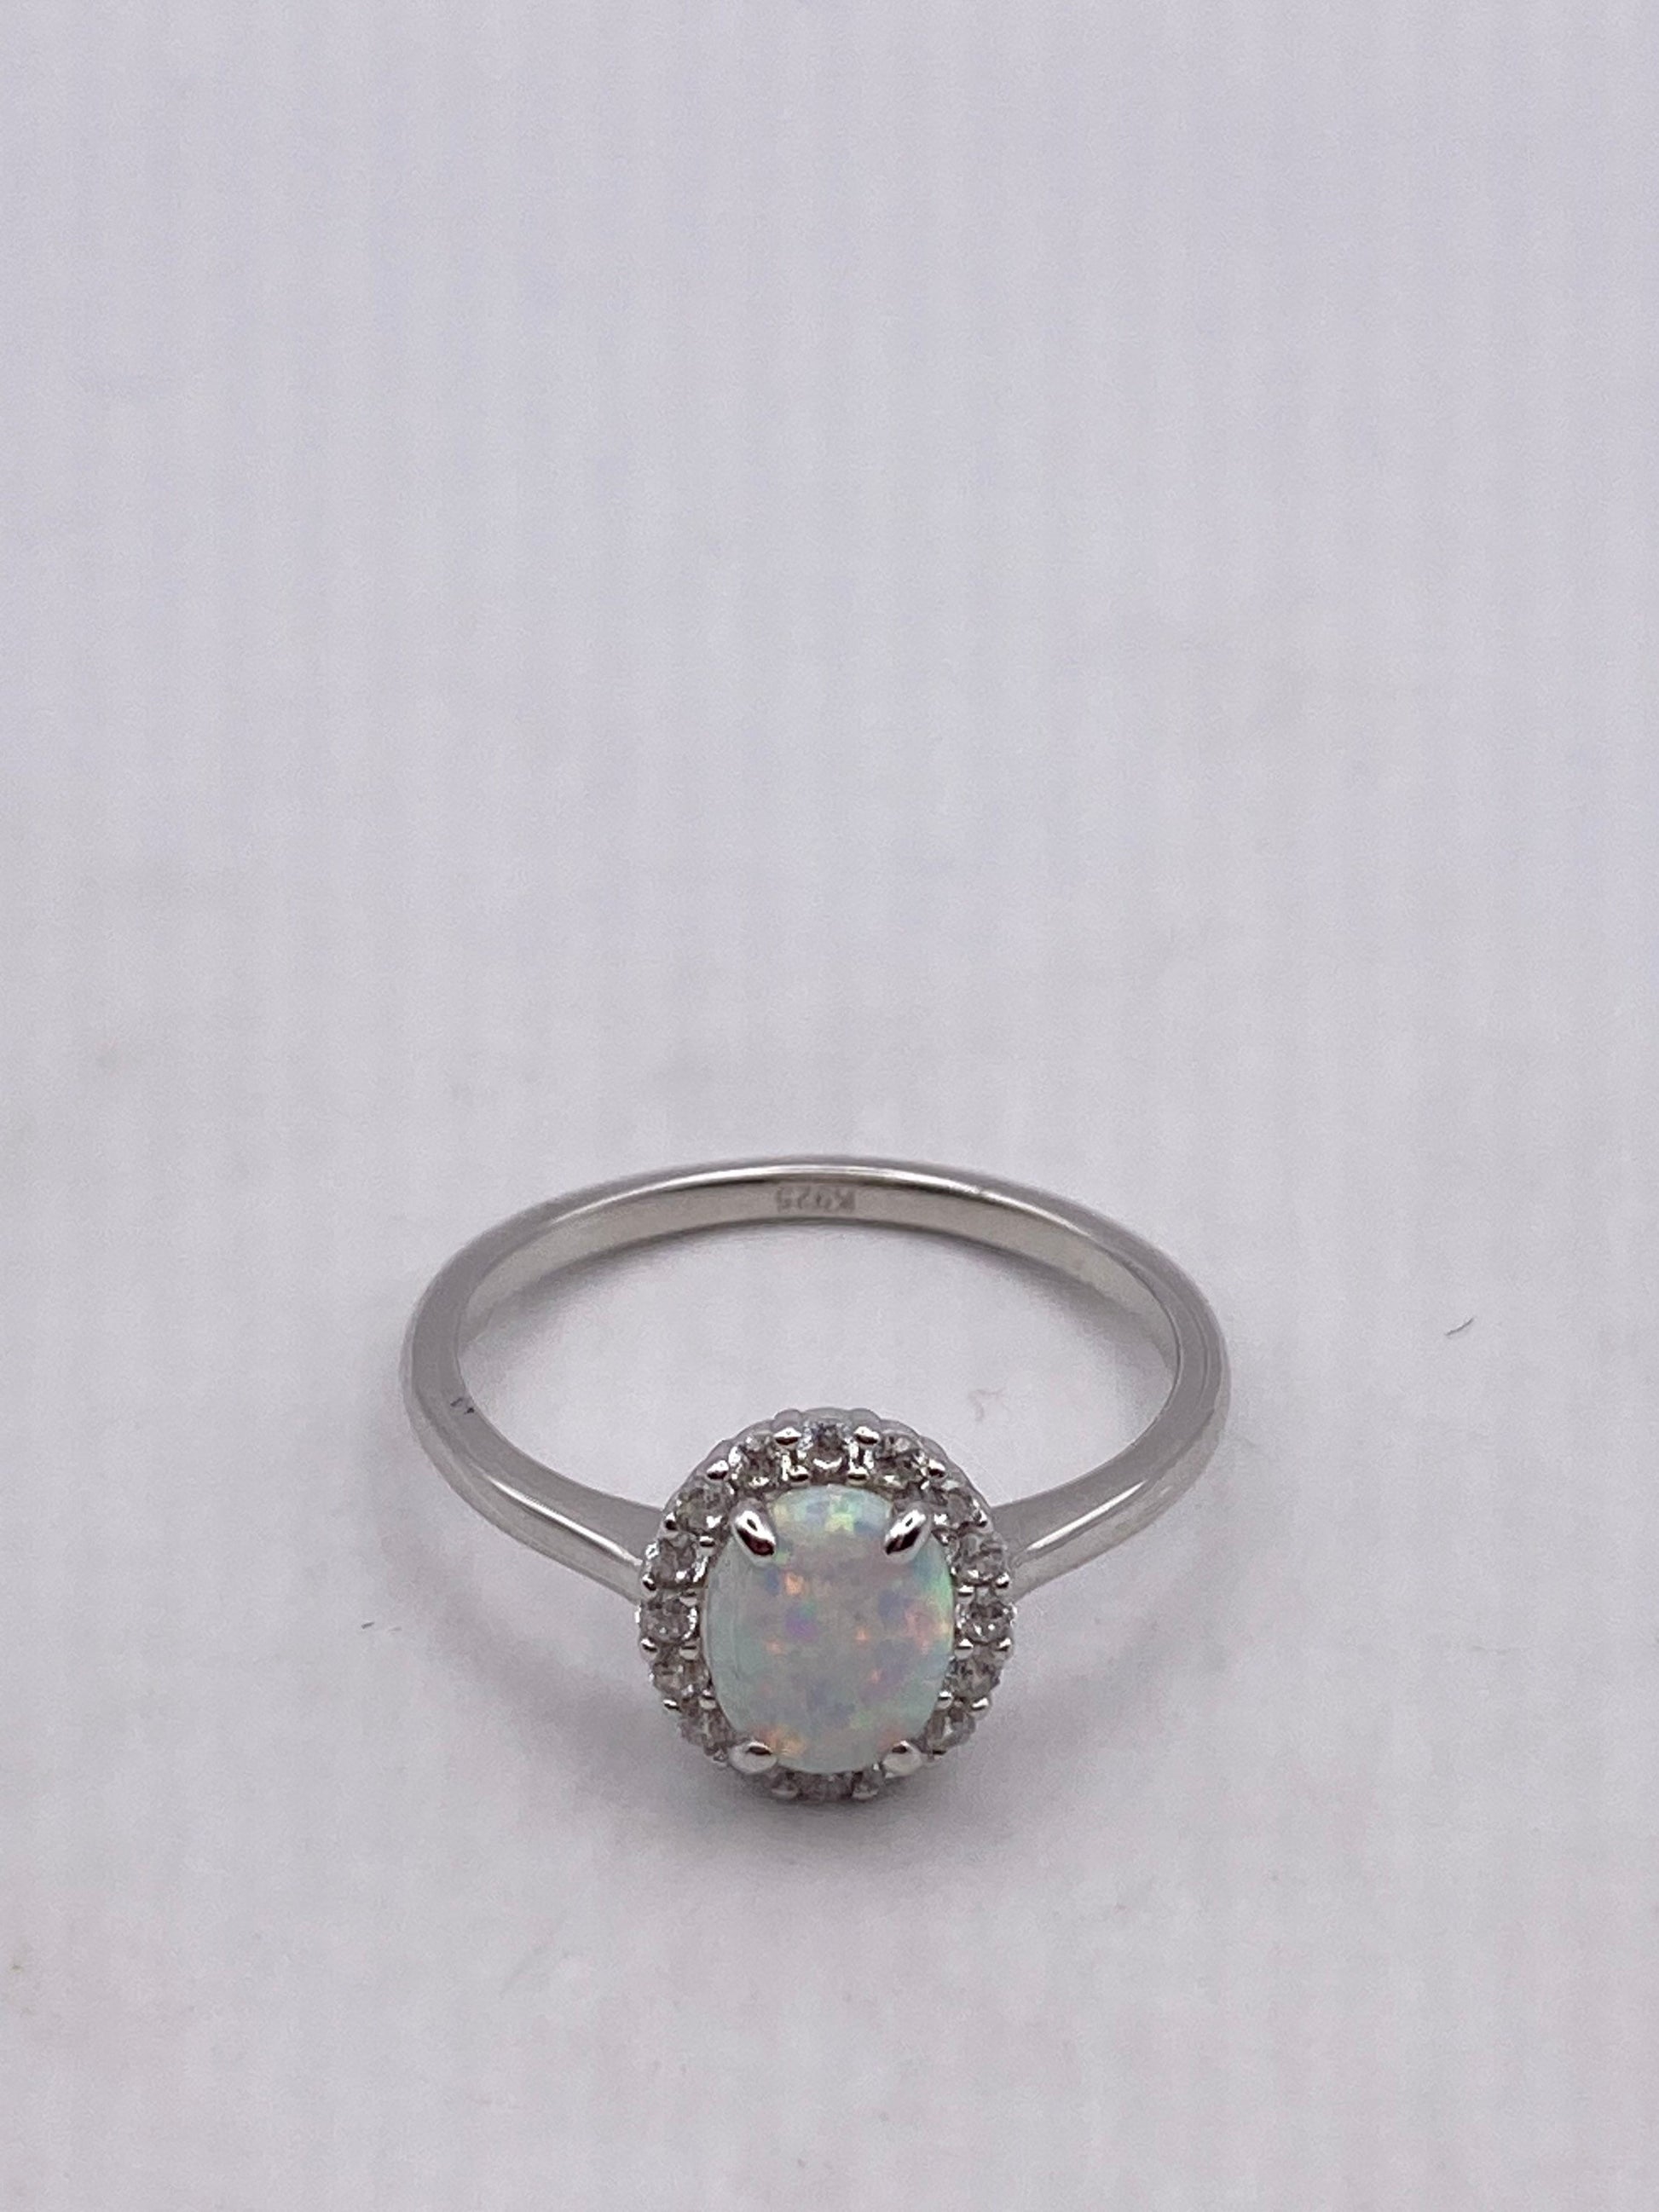 Vintage Ethiopian Fire Opal Wedding Band 925 Sterling Silver Ring